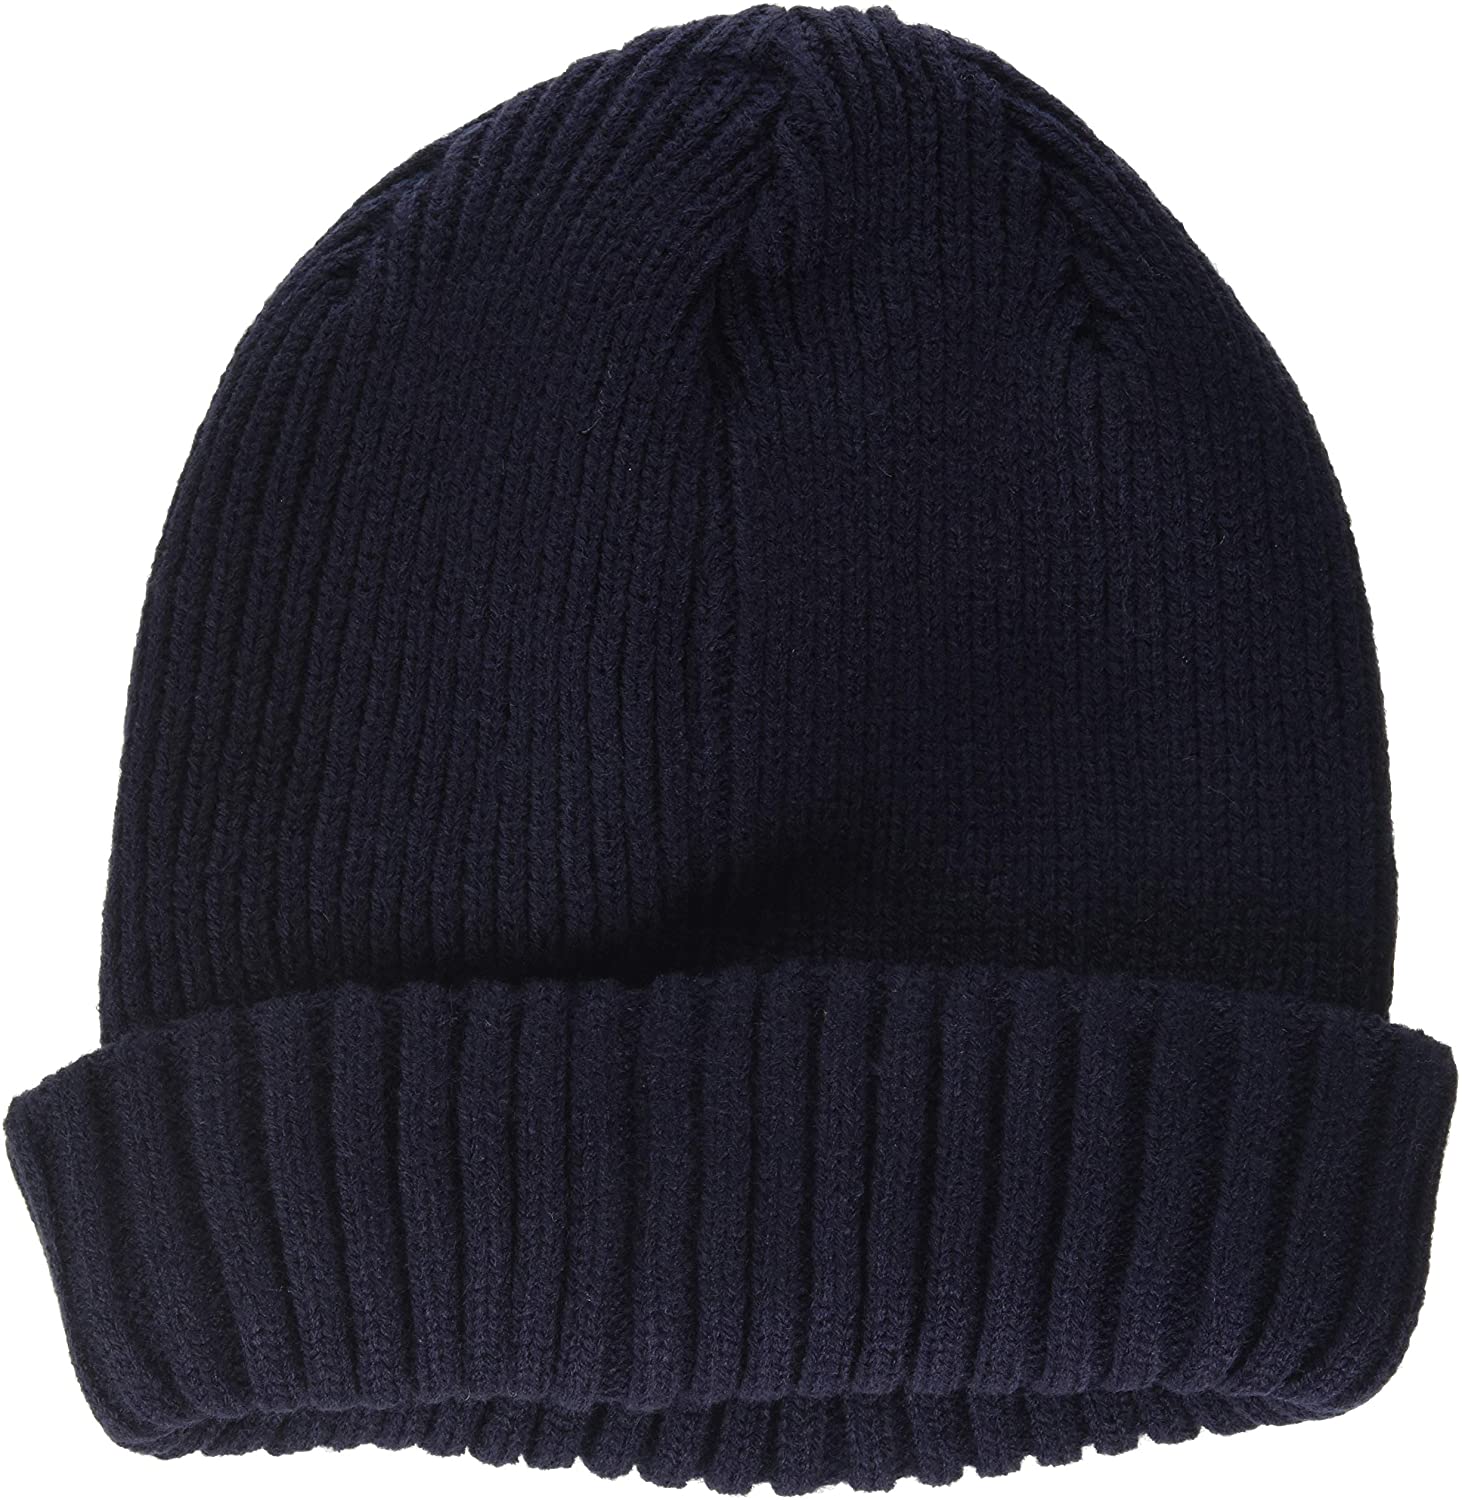 Details about   SealSkinz Waterproof Cold Weather Roll Cuff Beanie Hat 